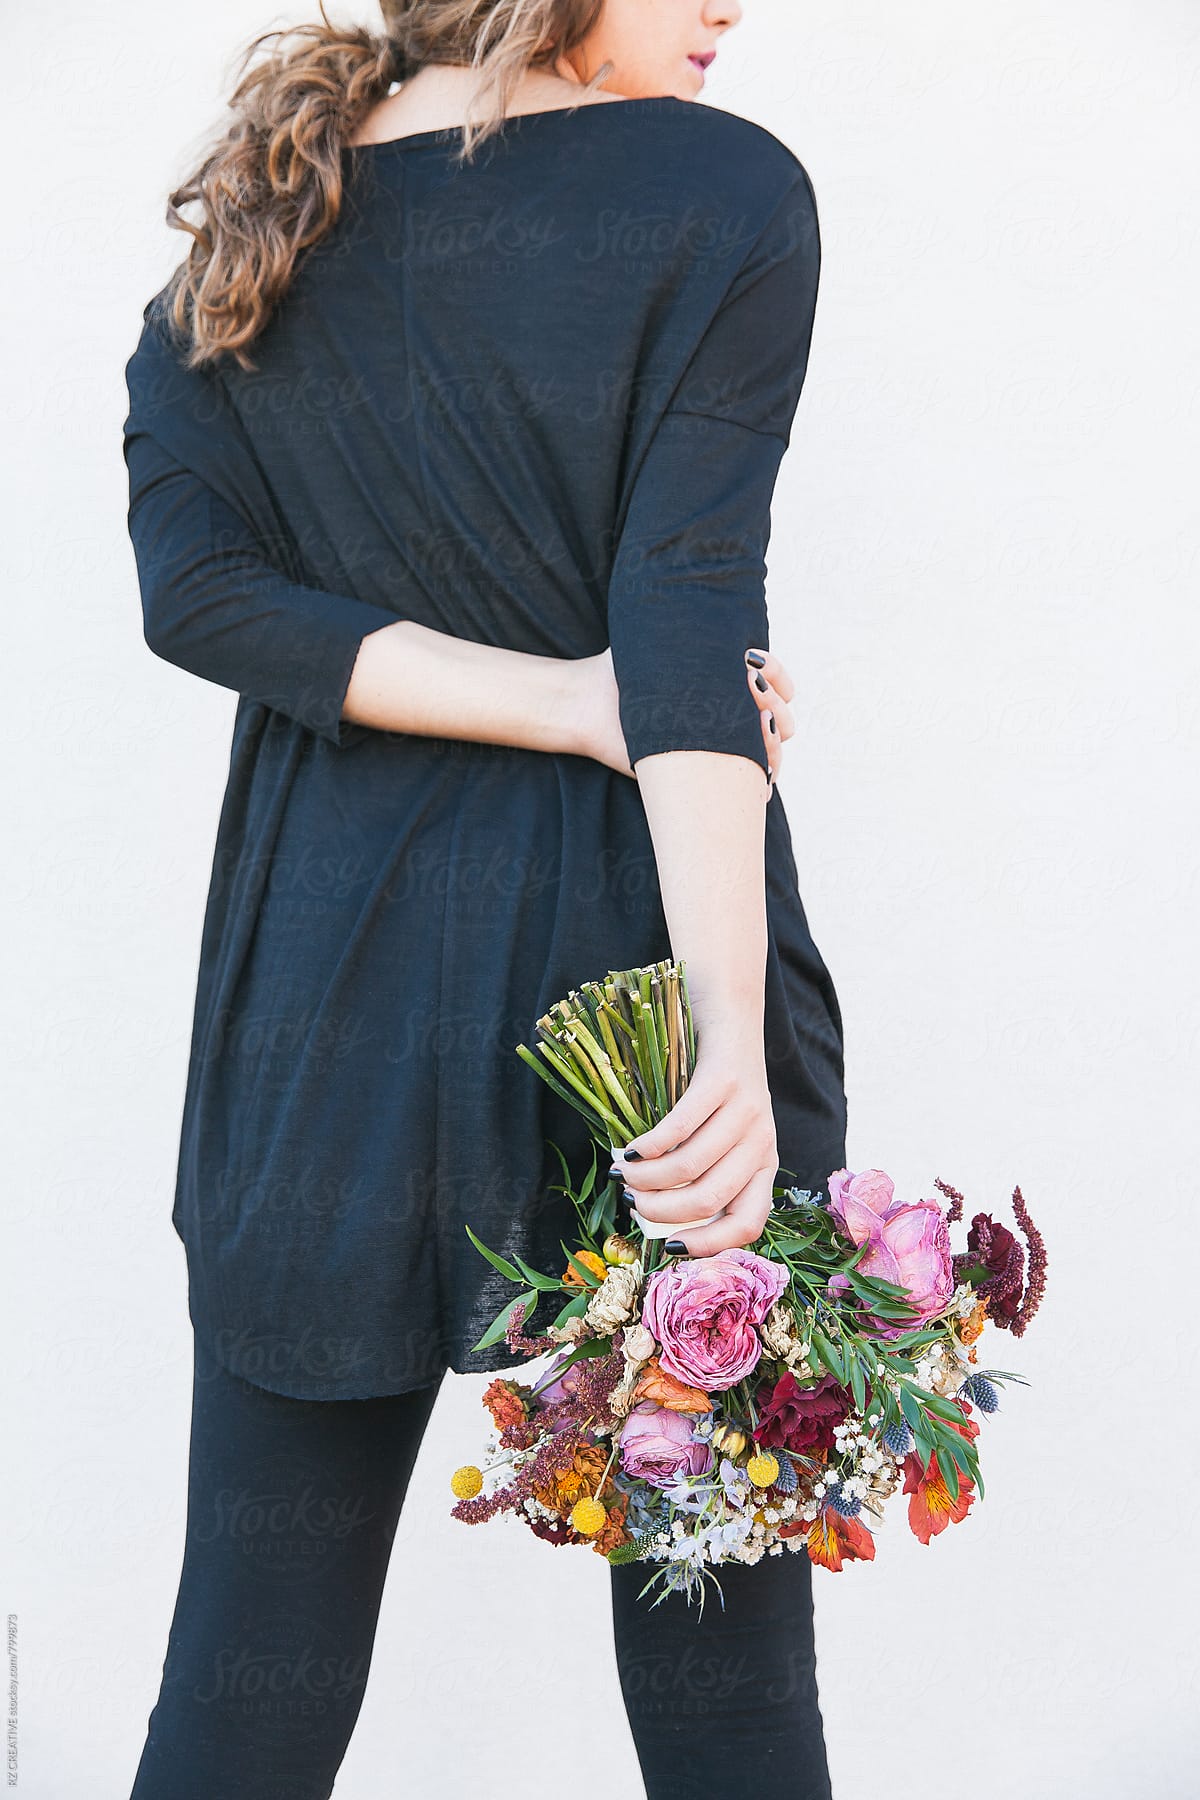 Woman wearing black holding a bouquet of wilting flowers on white background.